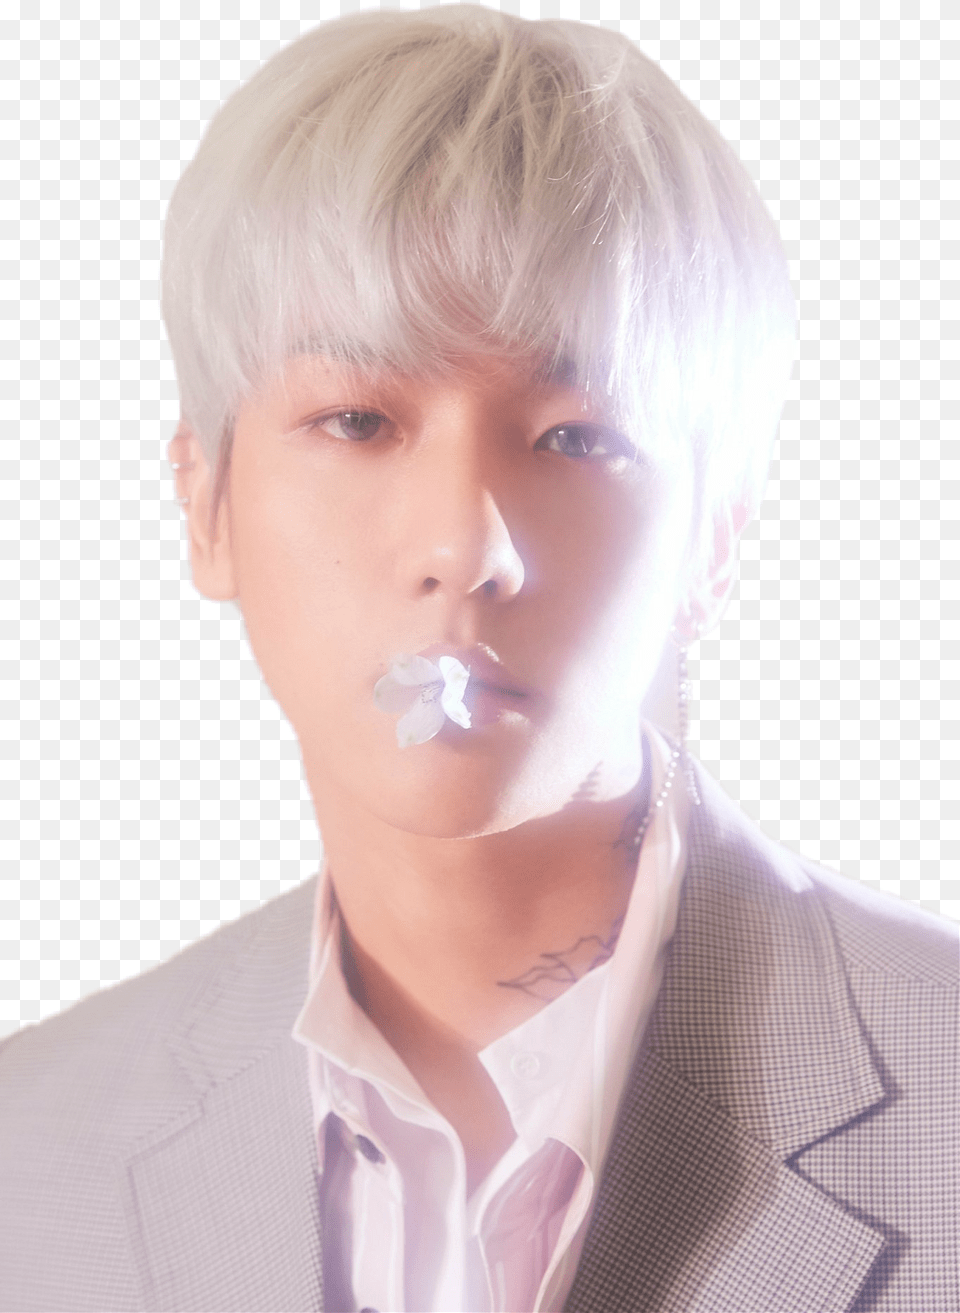 Baekhyun Baekhyunexo Exo Byunbaekhyun Baekhyun Blooming Day Teaser, Blonde, Hair, Person, Adult Png